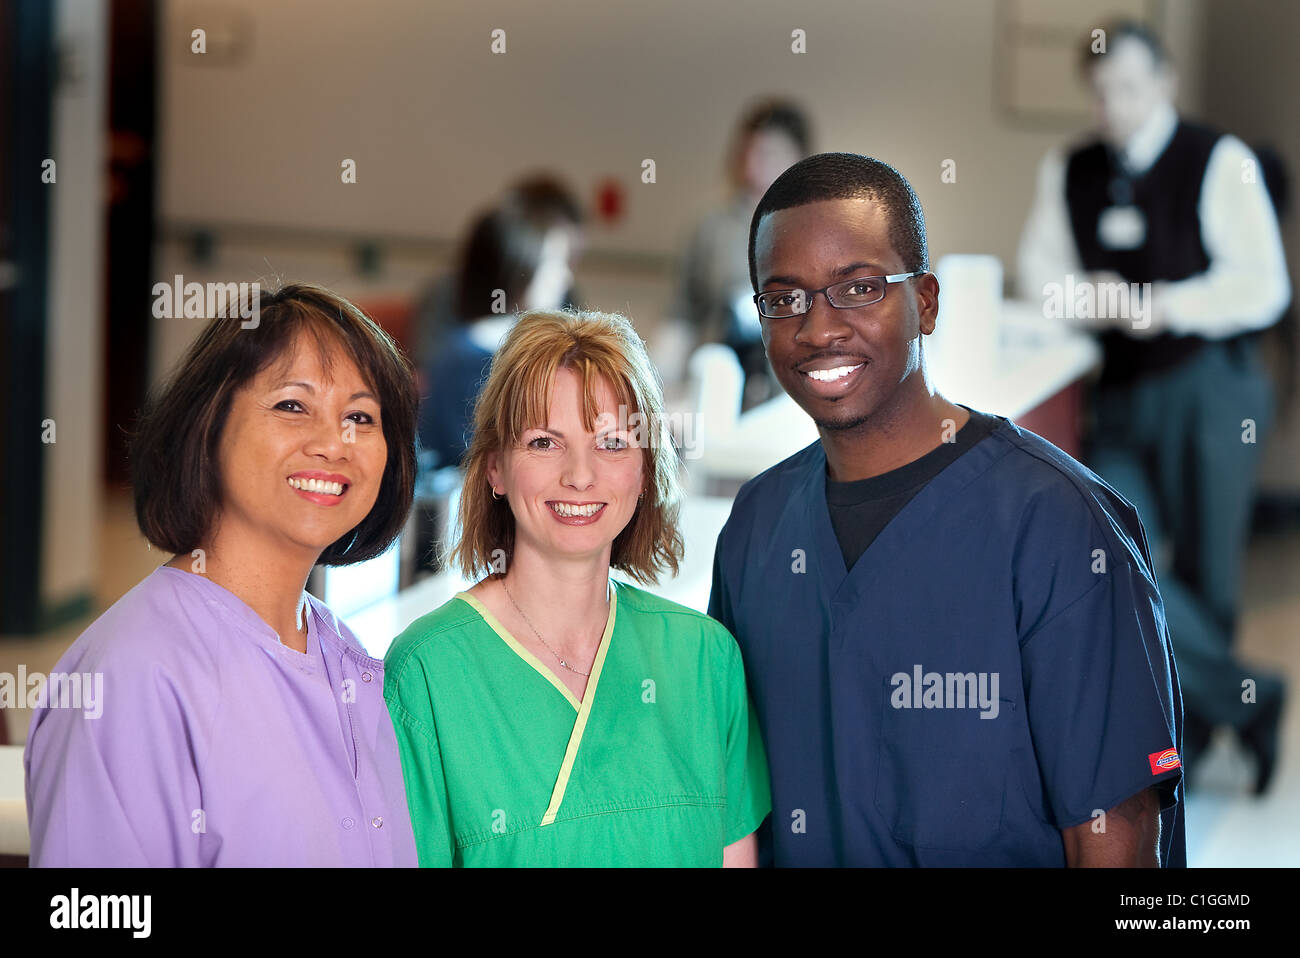 Nurses in a hospital. Various ethnic backgrounds. Health care related photo. Stock Photo